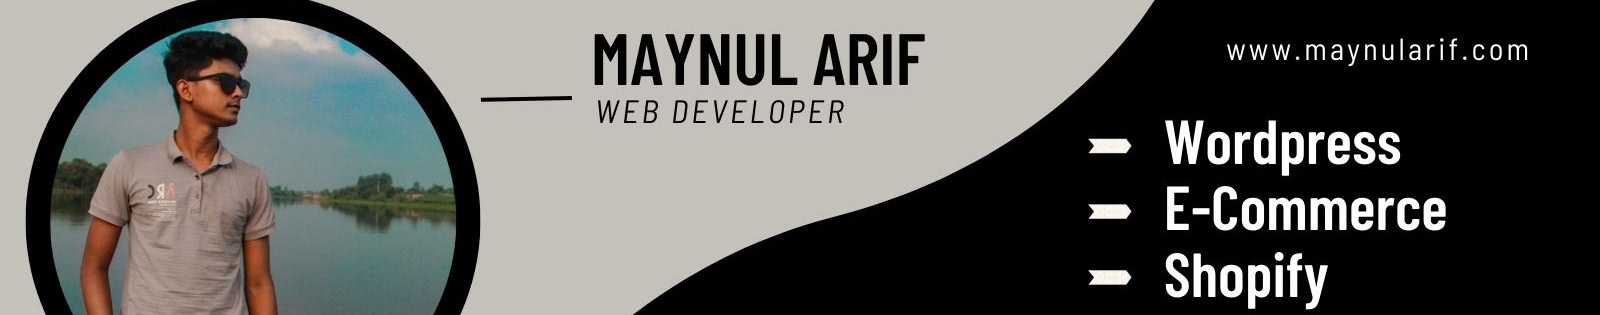 Maynul Arif's profile banner